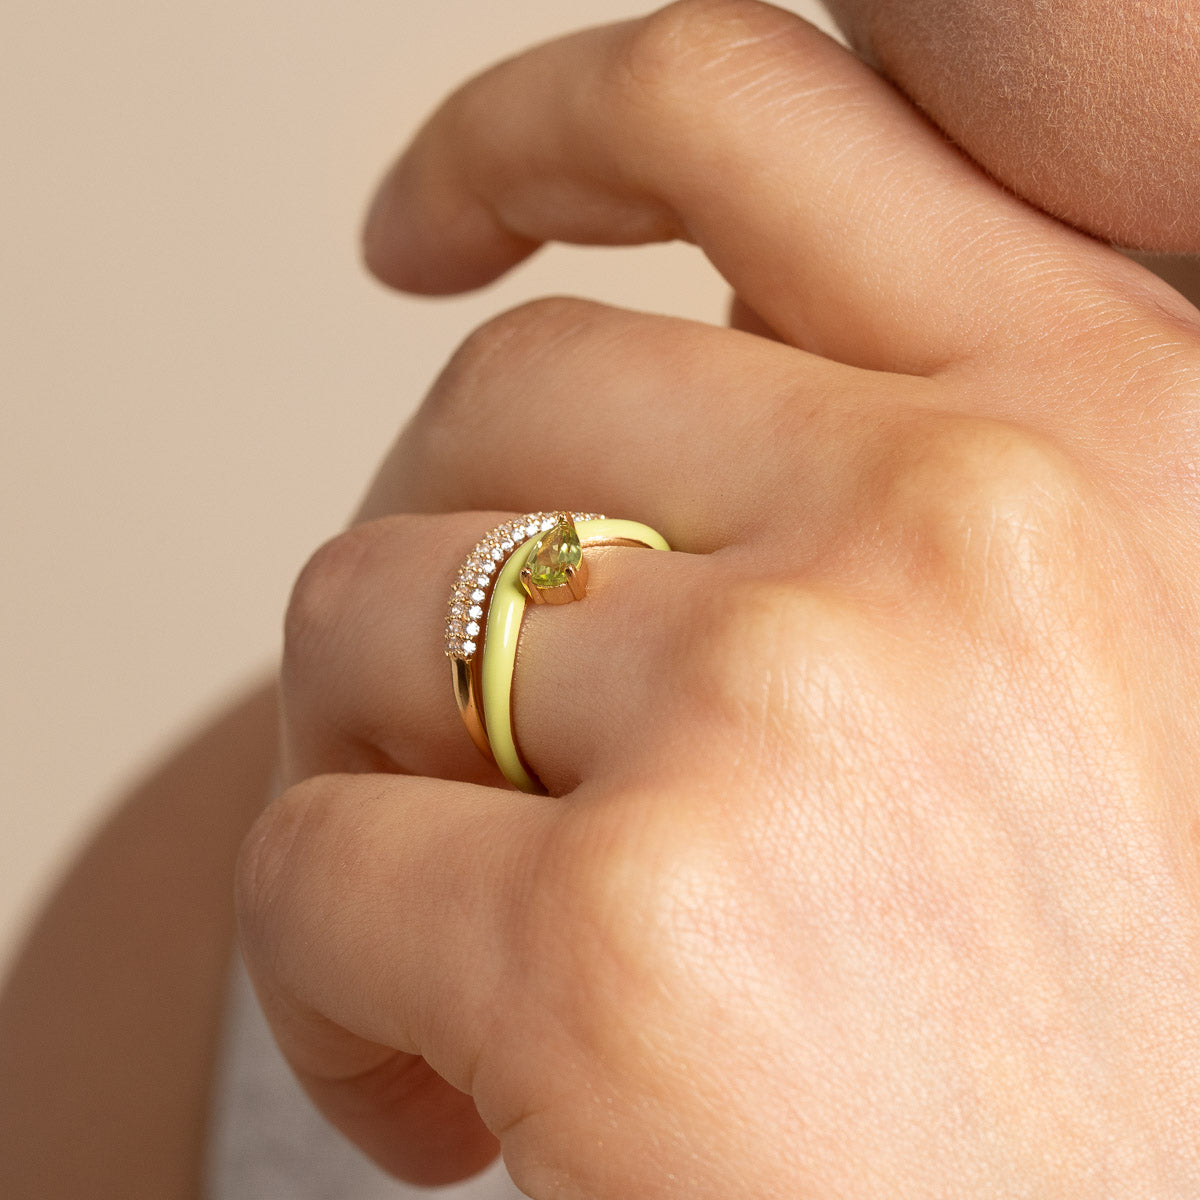 Astrid & Miyu | Wave Crystal Ring in Gold - P